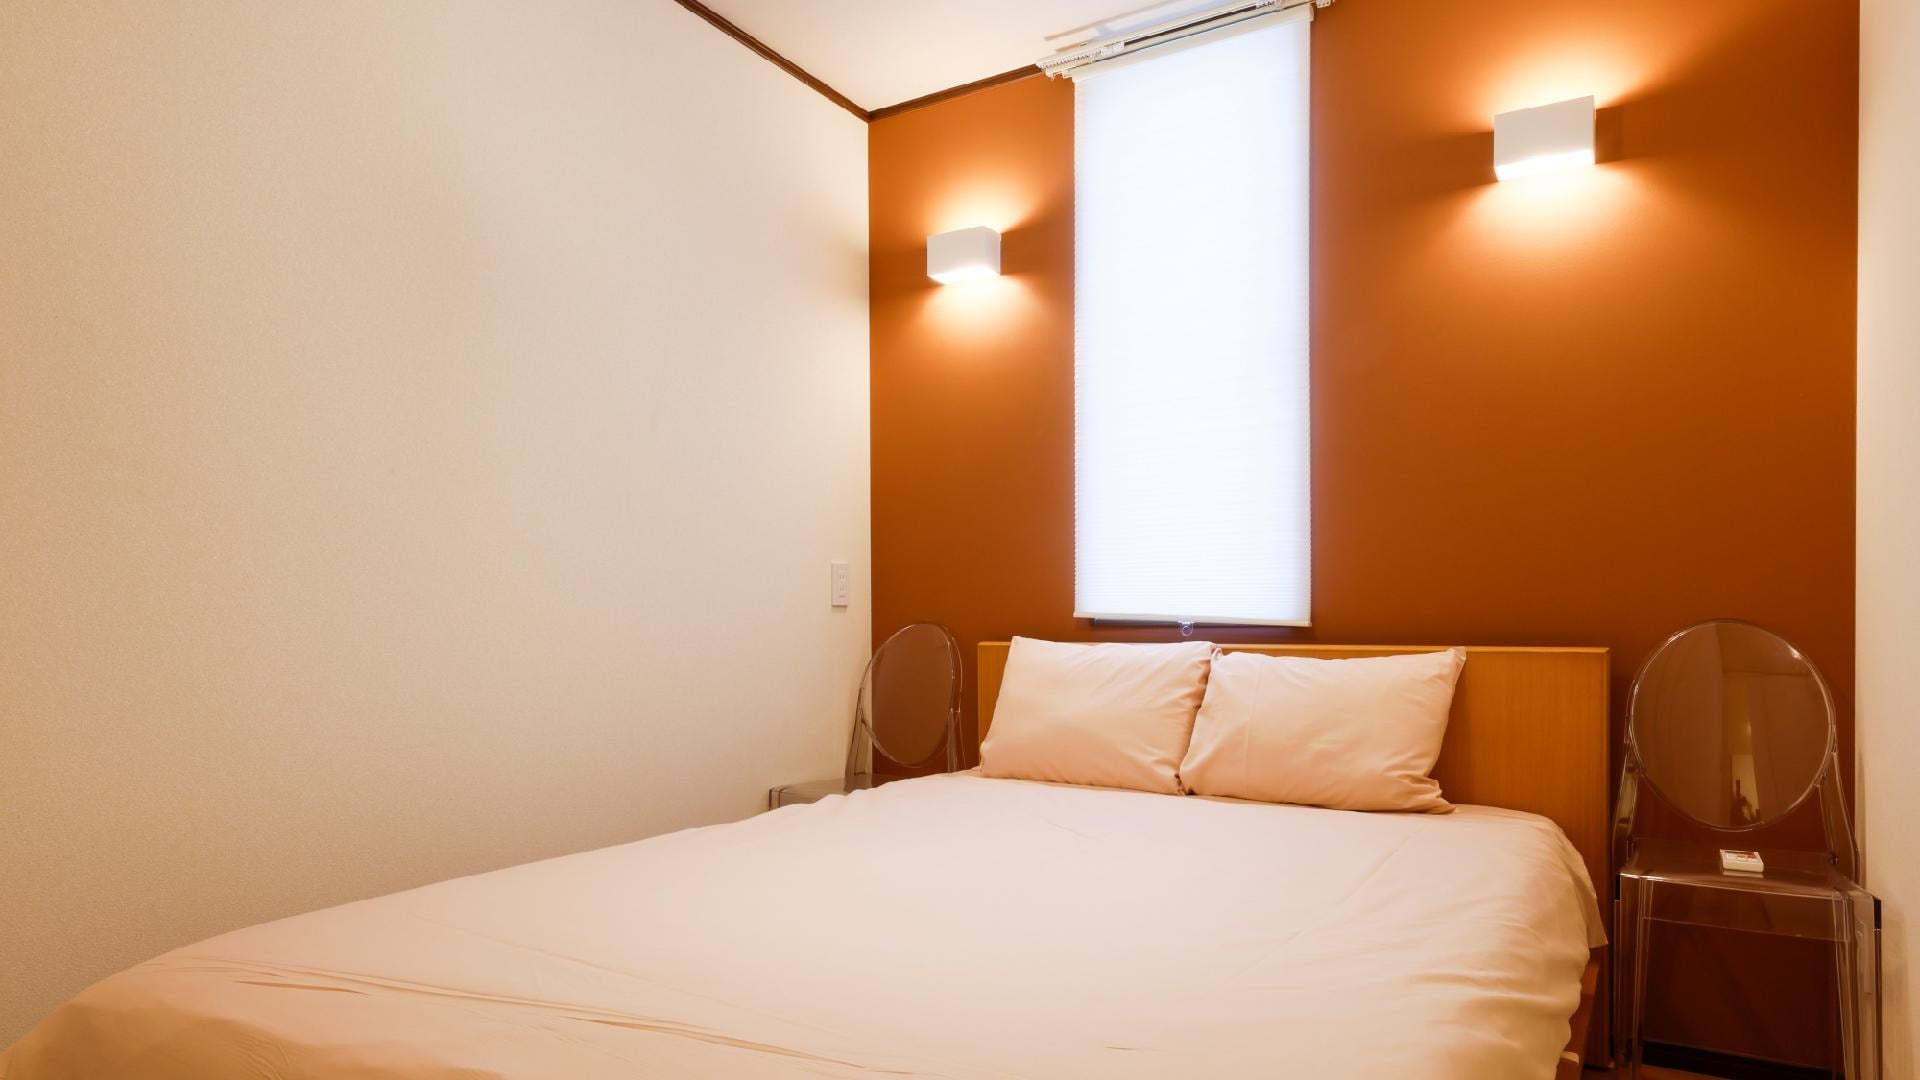 ■ 1st floor 〈Bedroom ①〉 You can relax just like at home.